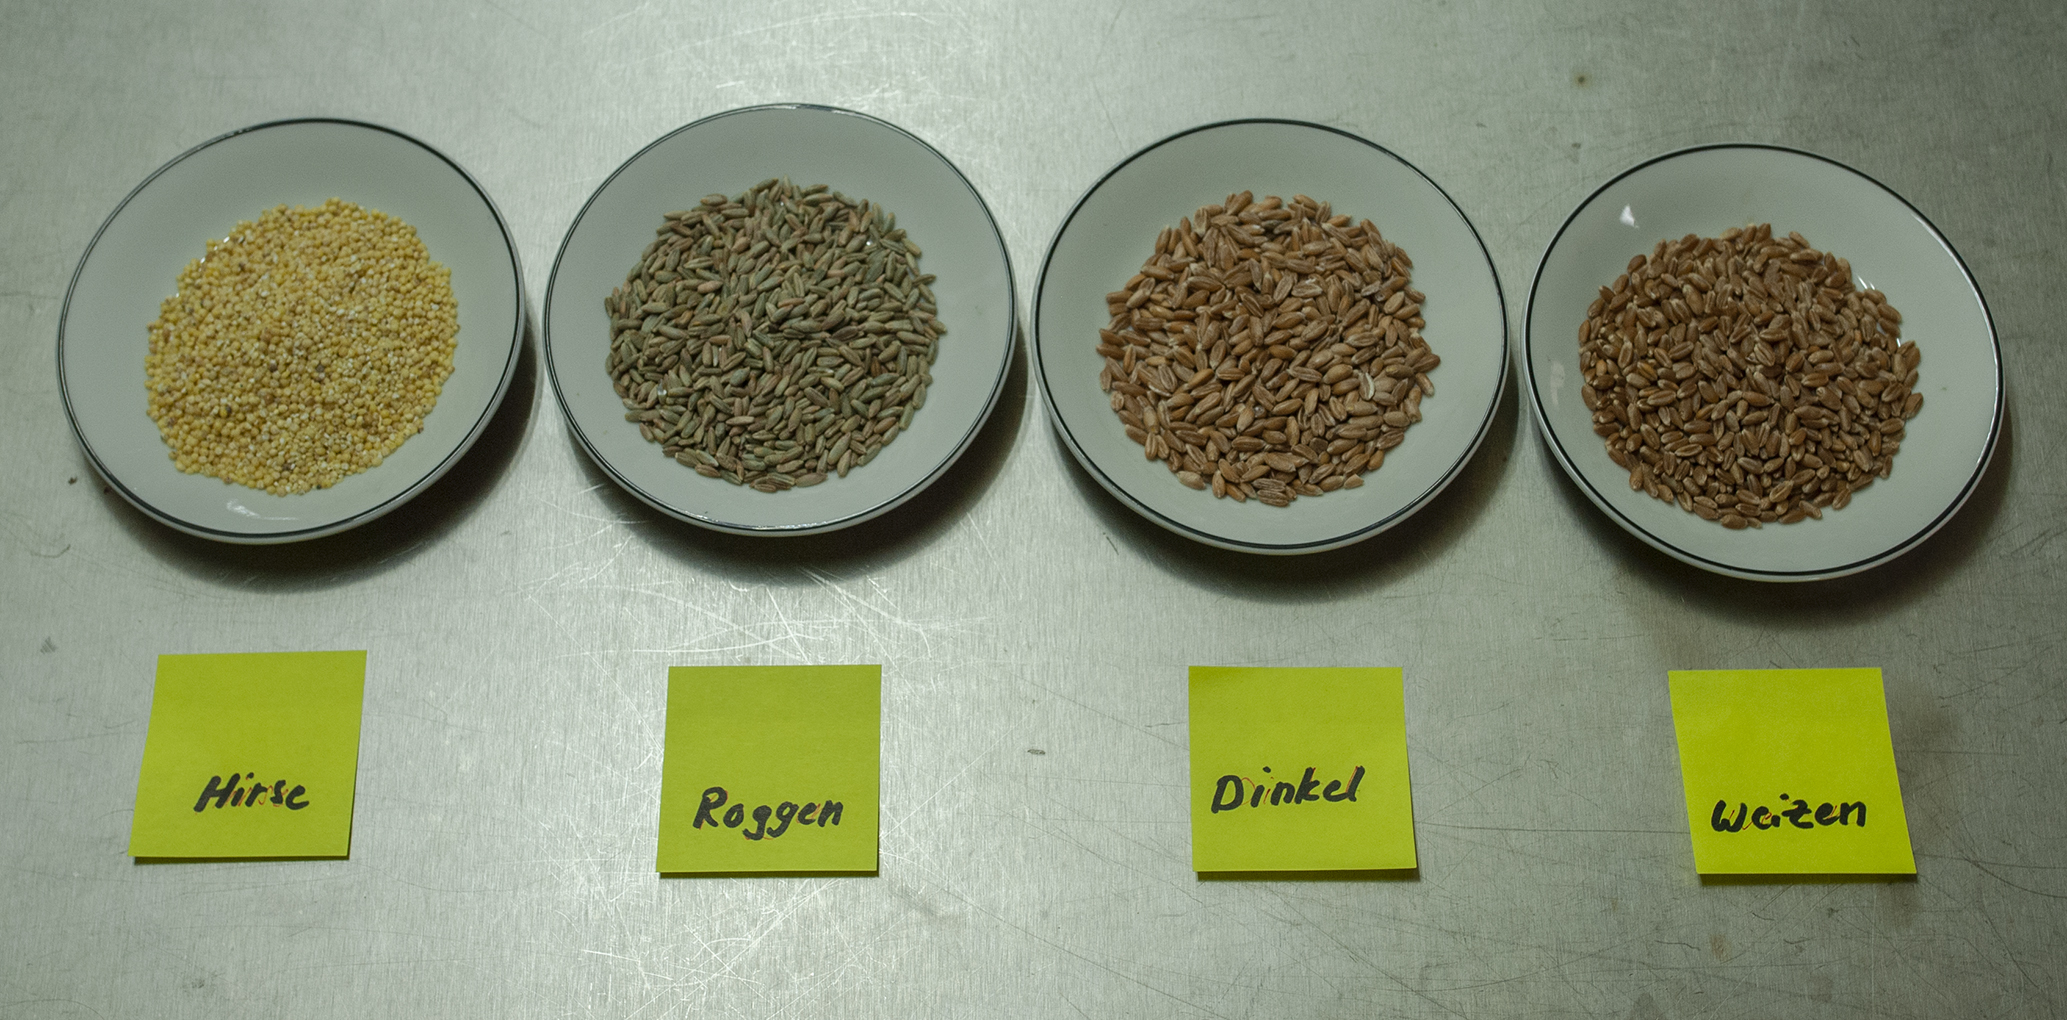 For the grain spawn you can use: millet, rye, spelt, Wheat